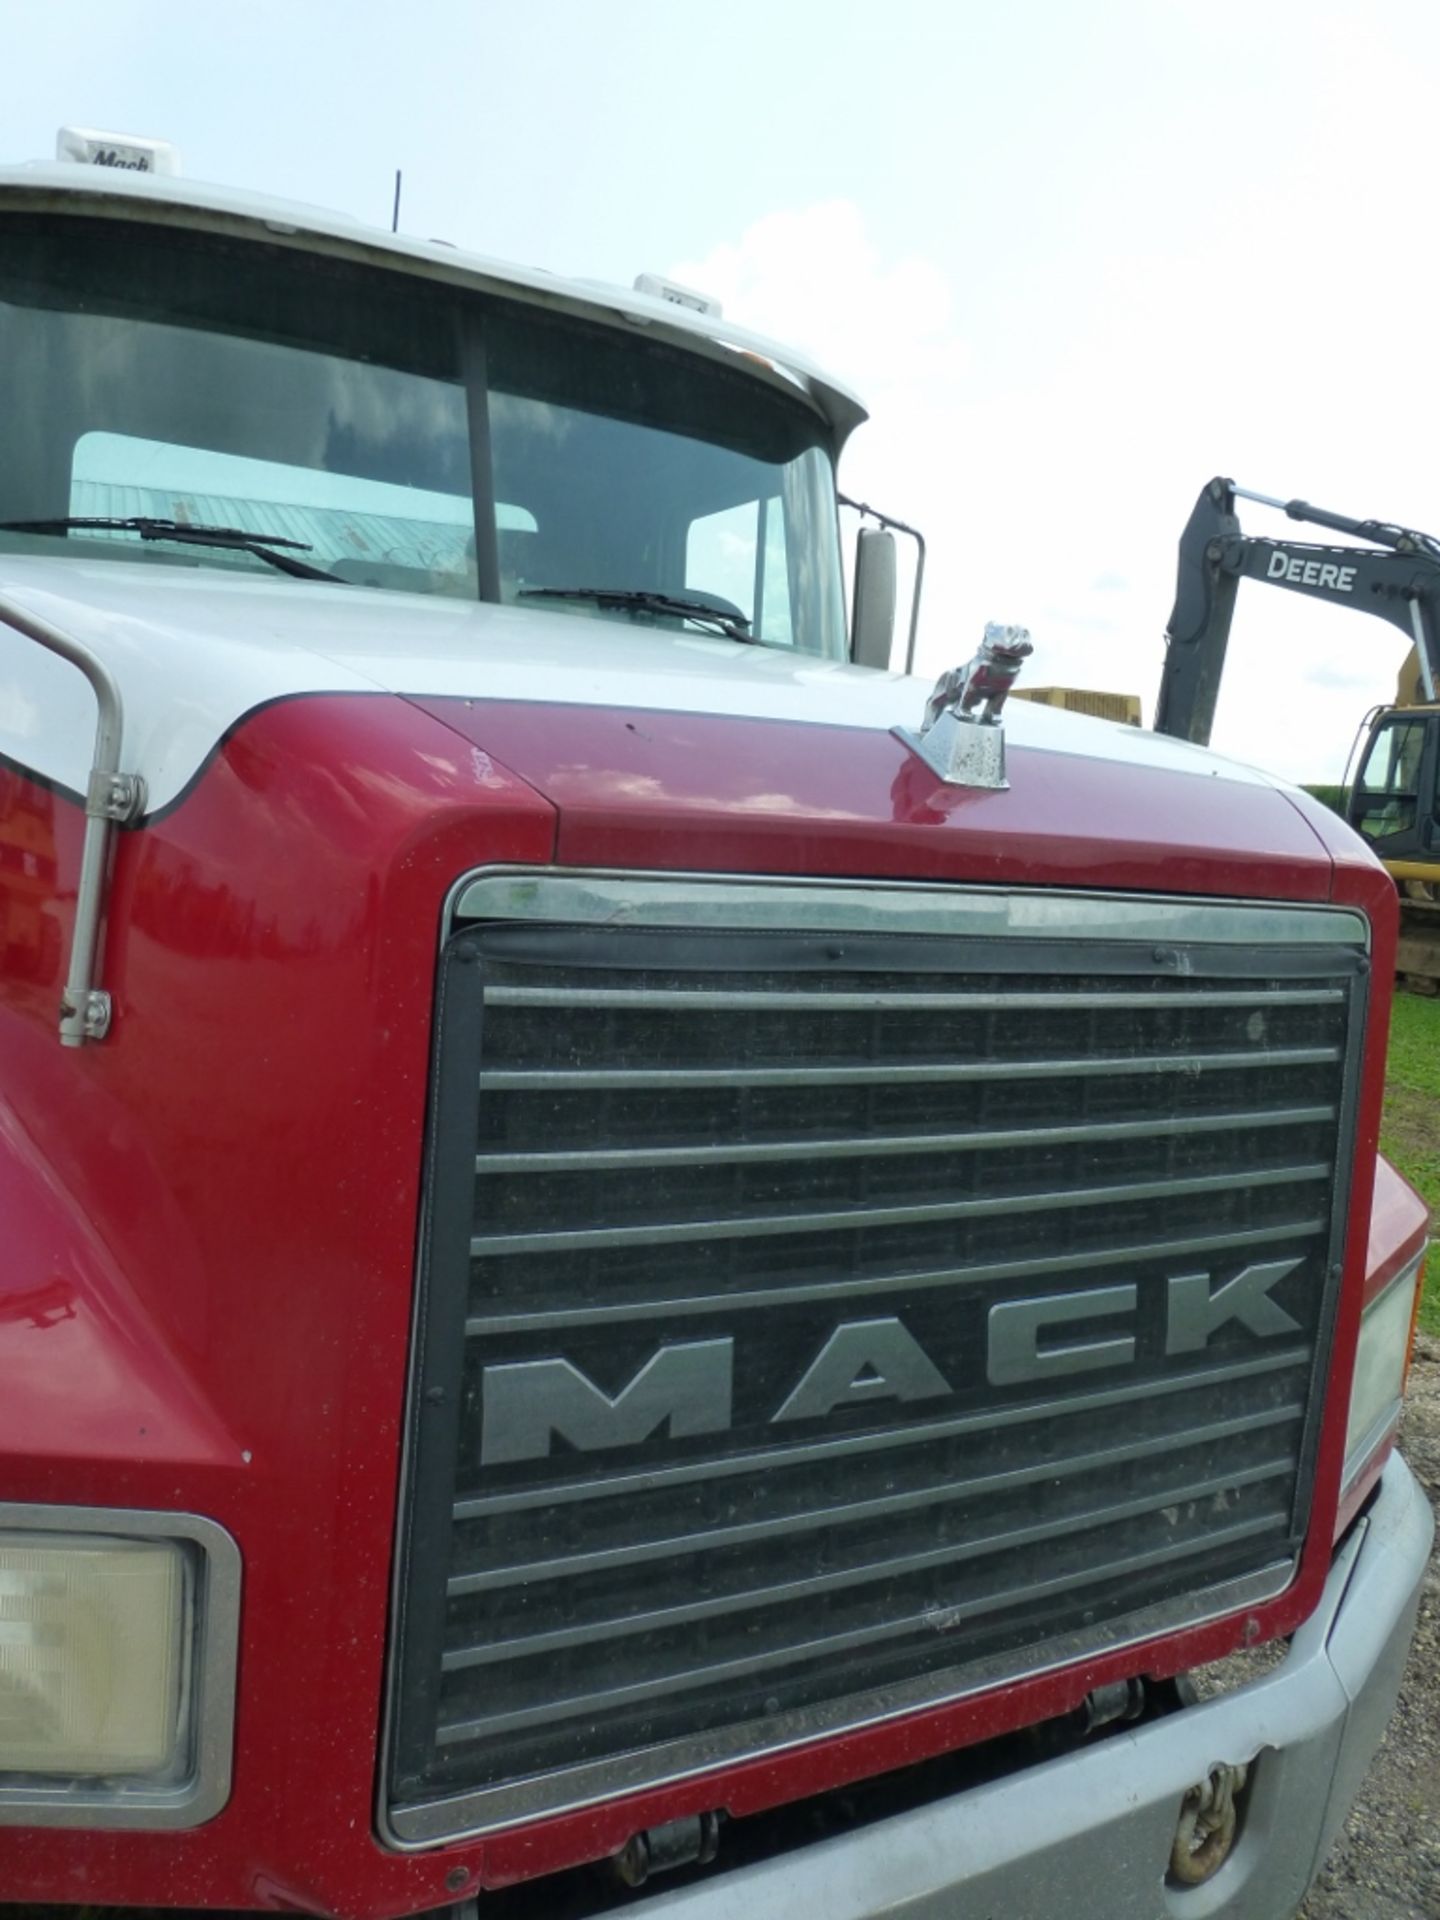 2000 Mack Truck Country 613CH, 3 axle, day cab, MaxiTorque T2090 9spd trans, Mack 335hp engine. E7- - Image 9 of 25